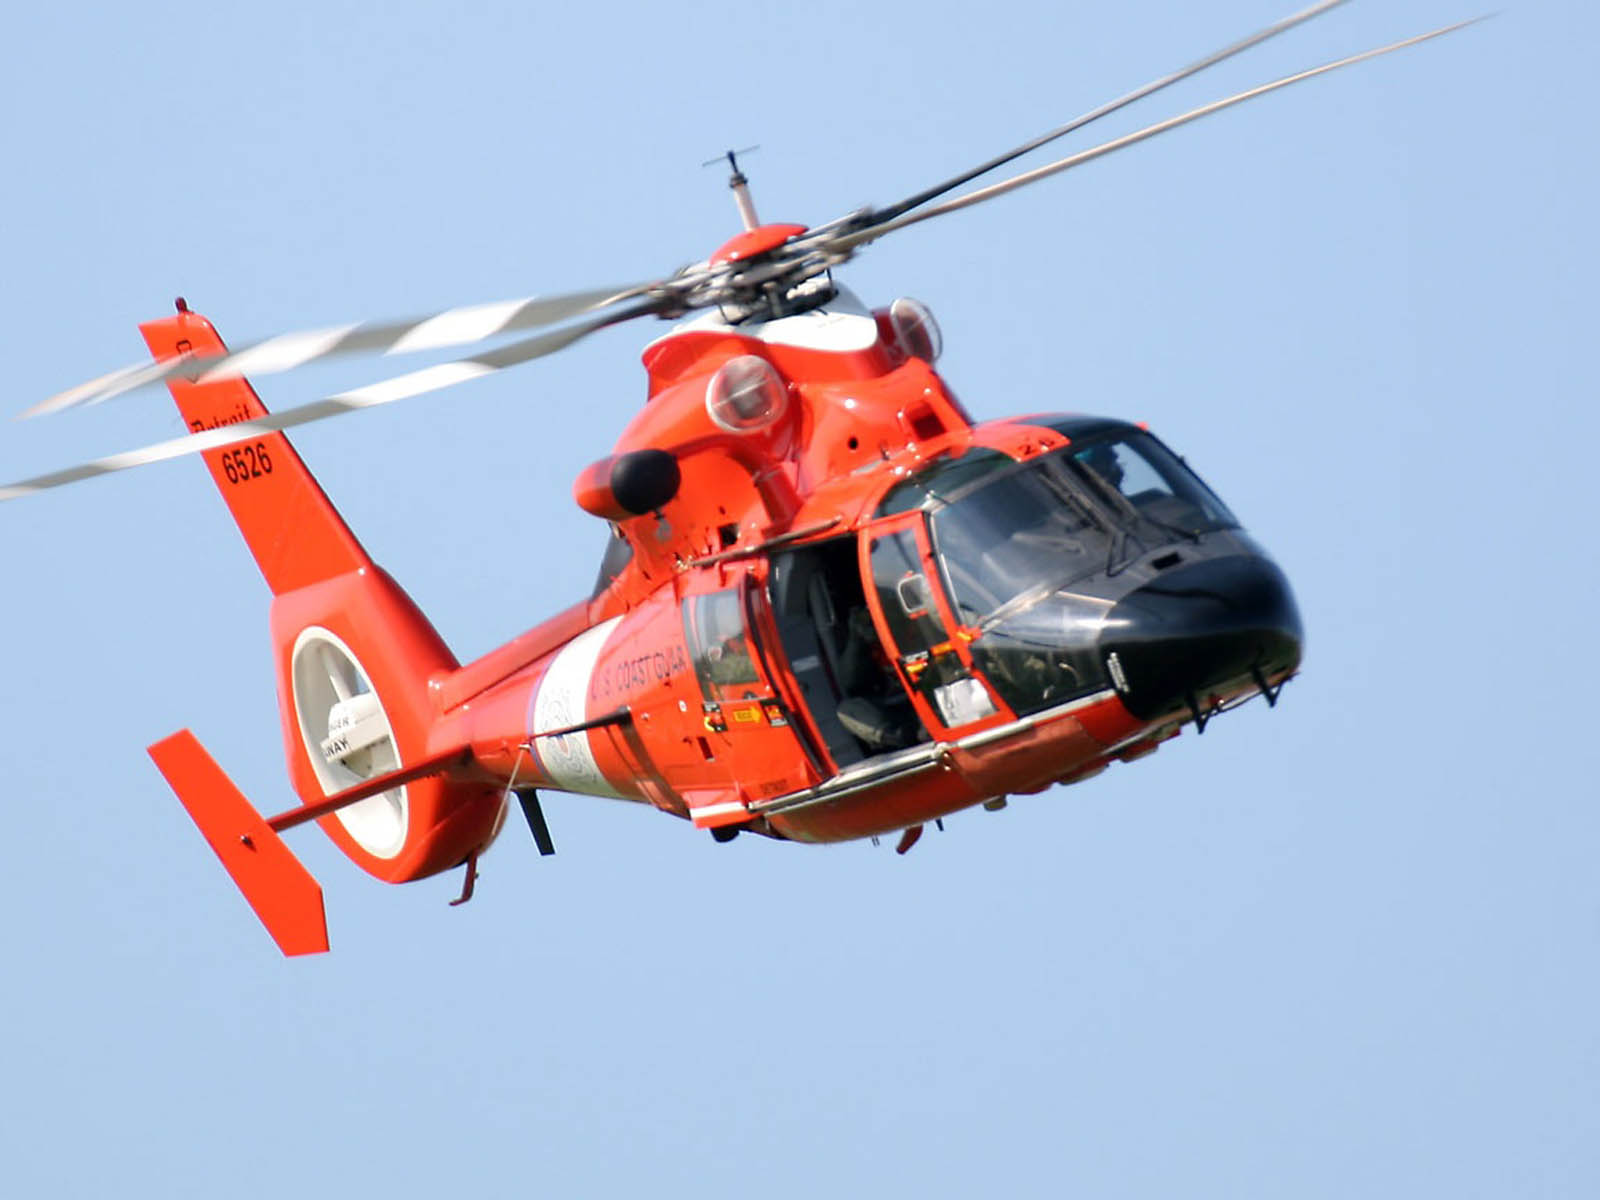 Guard Helicopter Wallpaper In The Category Of Aircrafts